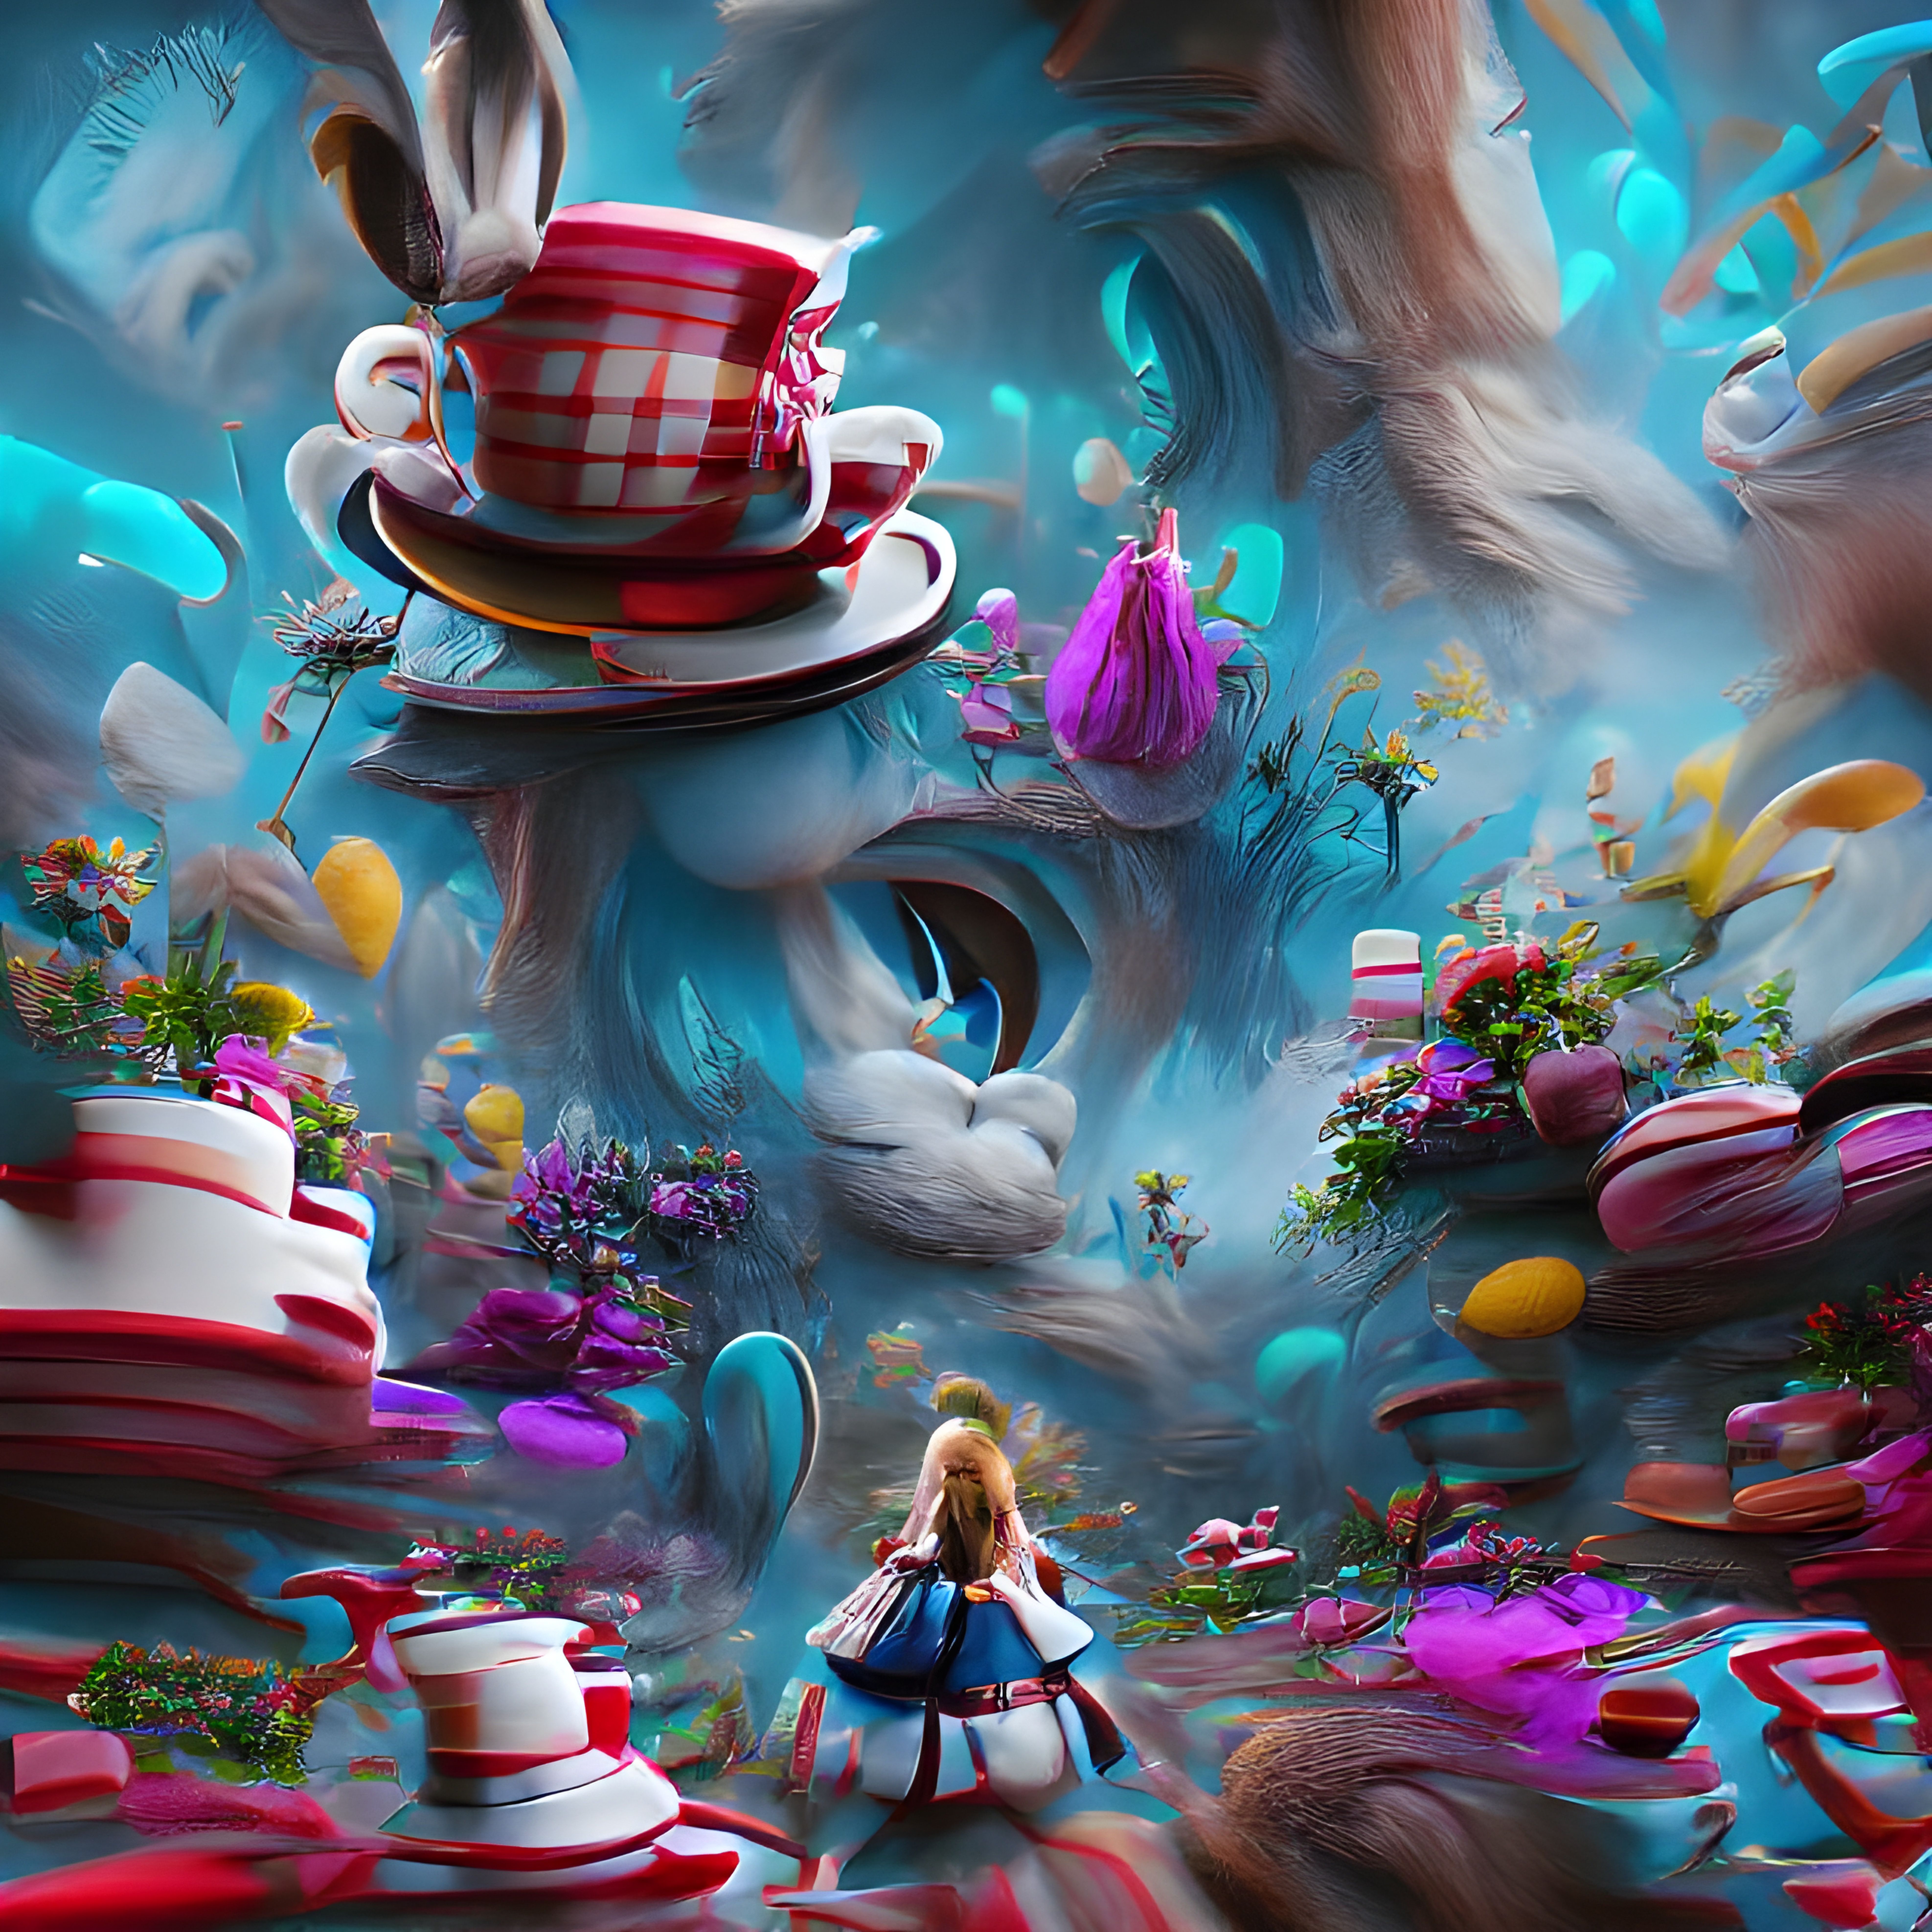 Alice In Wonderland! Disney by YeiyeiArt - v1.0, Stable Diffusion LoRA